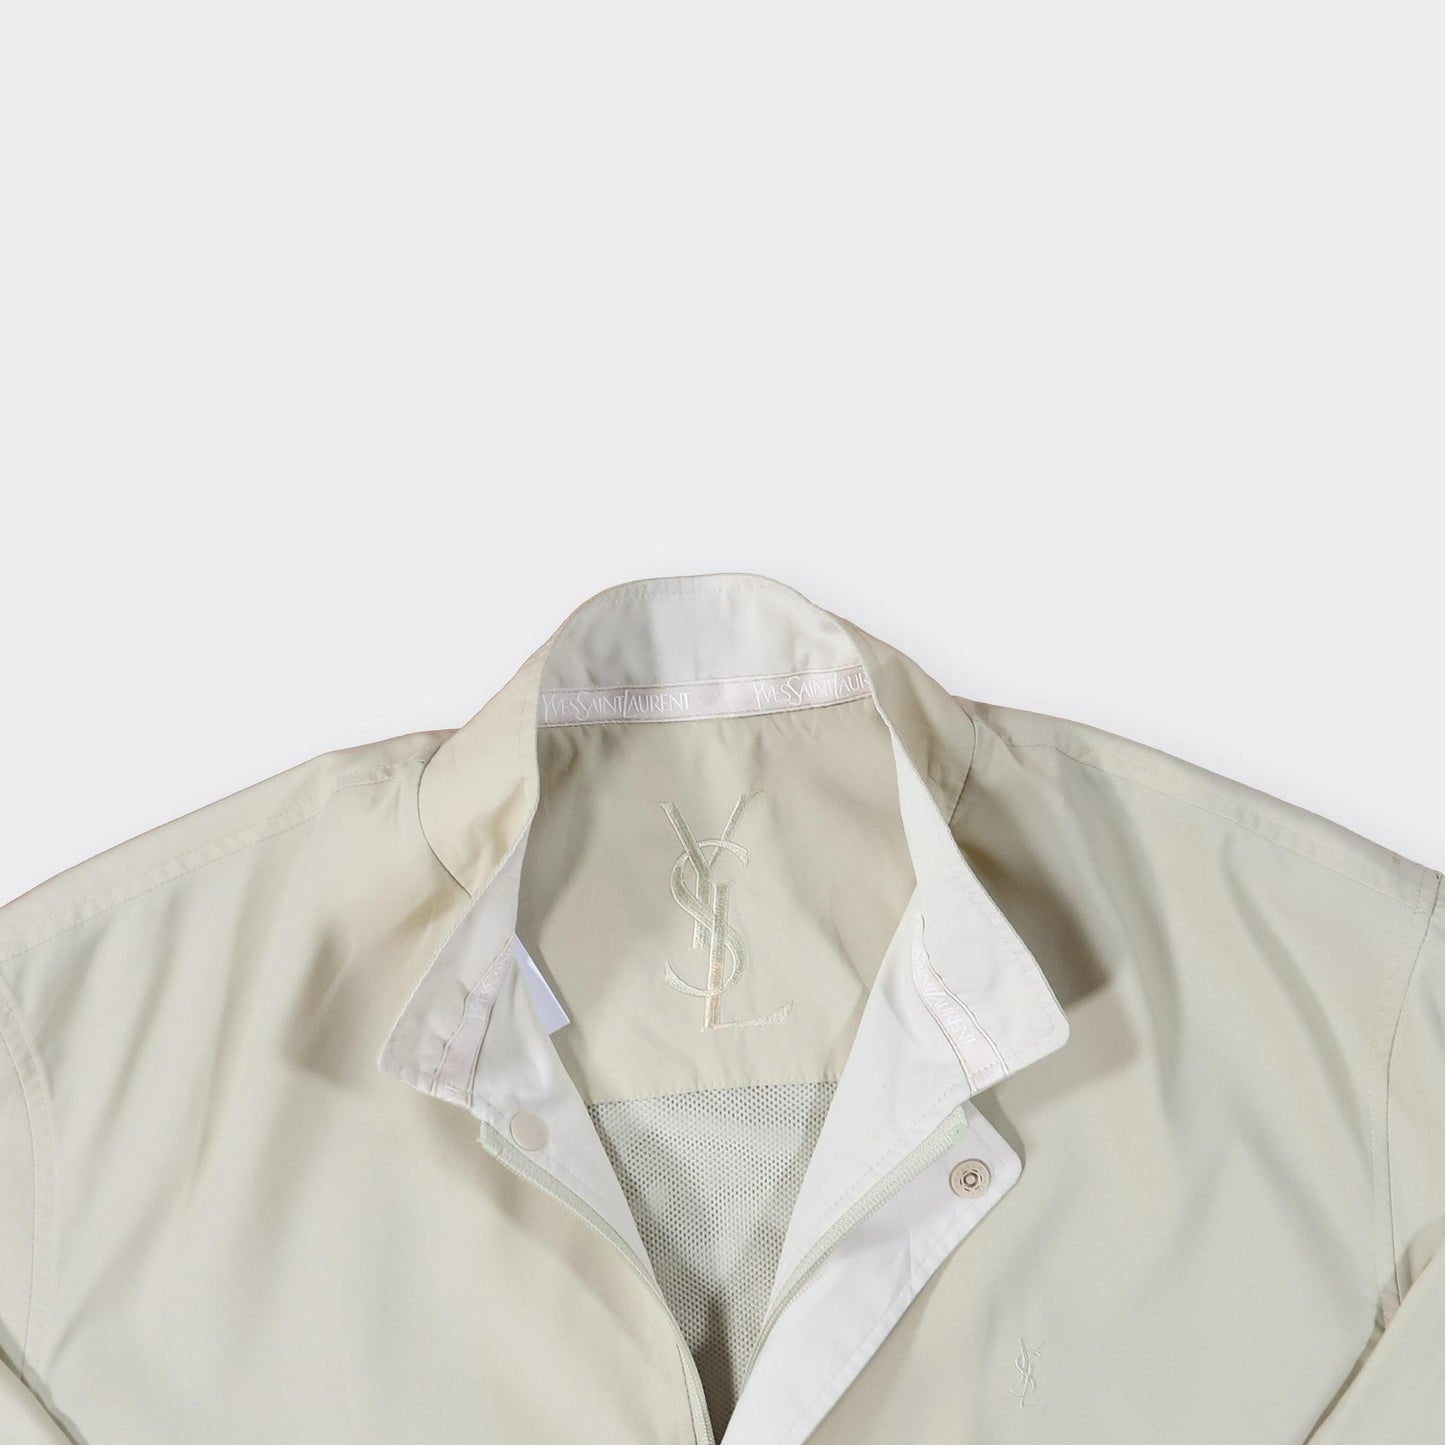 Yves Saint Laurent Vintage Jacket - Small - Known Source